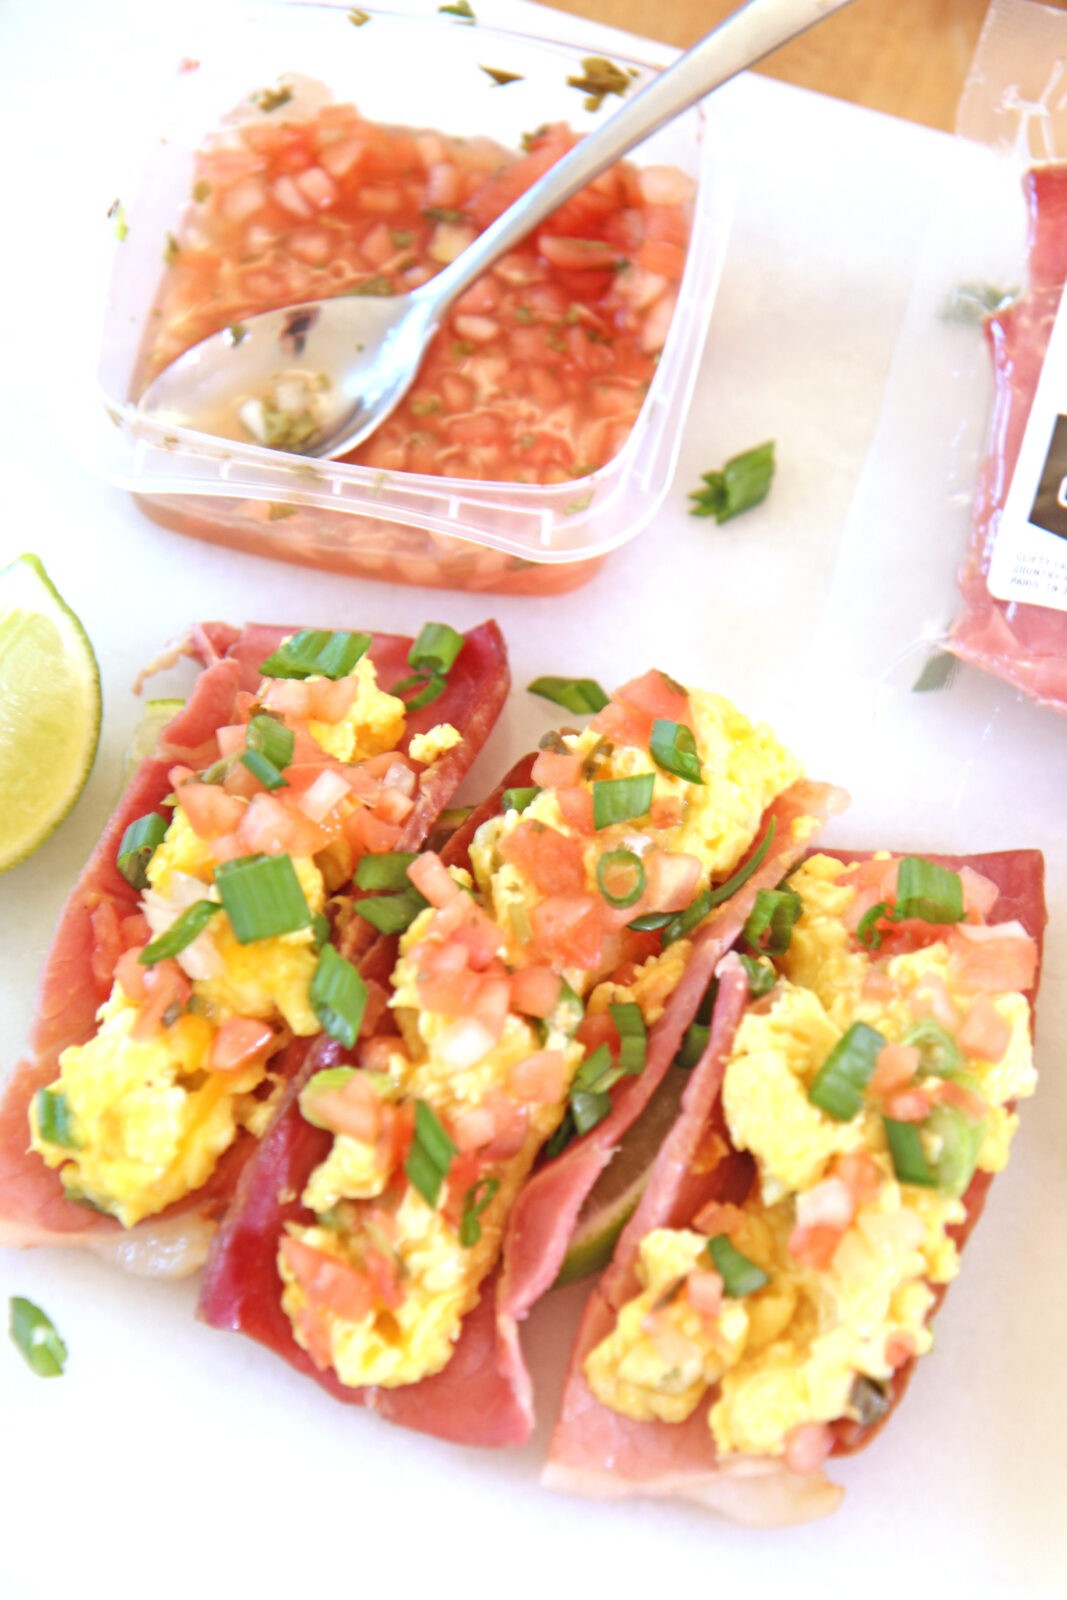 Breakfast Taco With Ham Shell Recipe. Easy gluten free and keto friendly brunch recipe. This recipe includes eggs, Greek yogurt, ham and other breakfast fun. Happy Cooking! www.ChopHappy.com #breakfasttacos #tacoTuesday